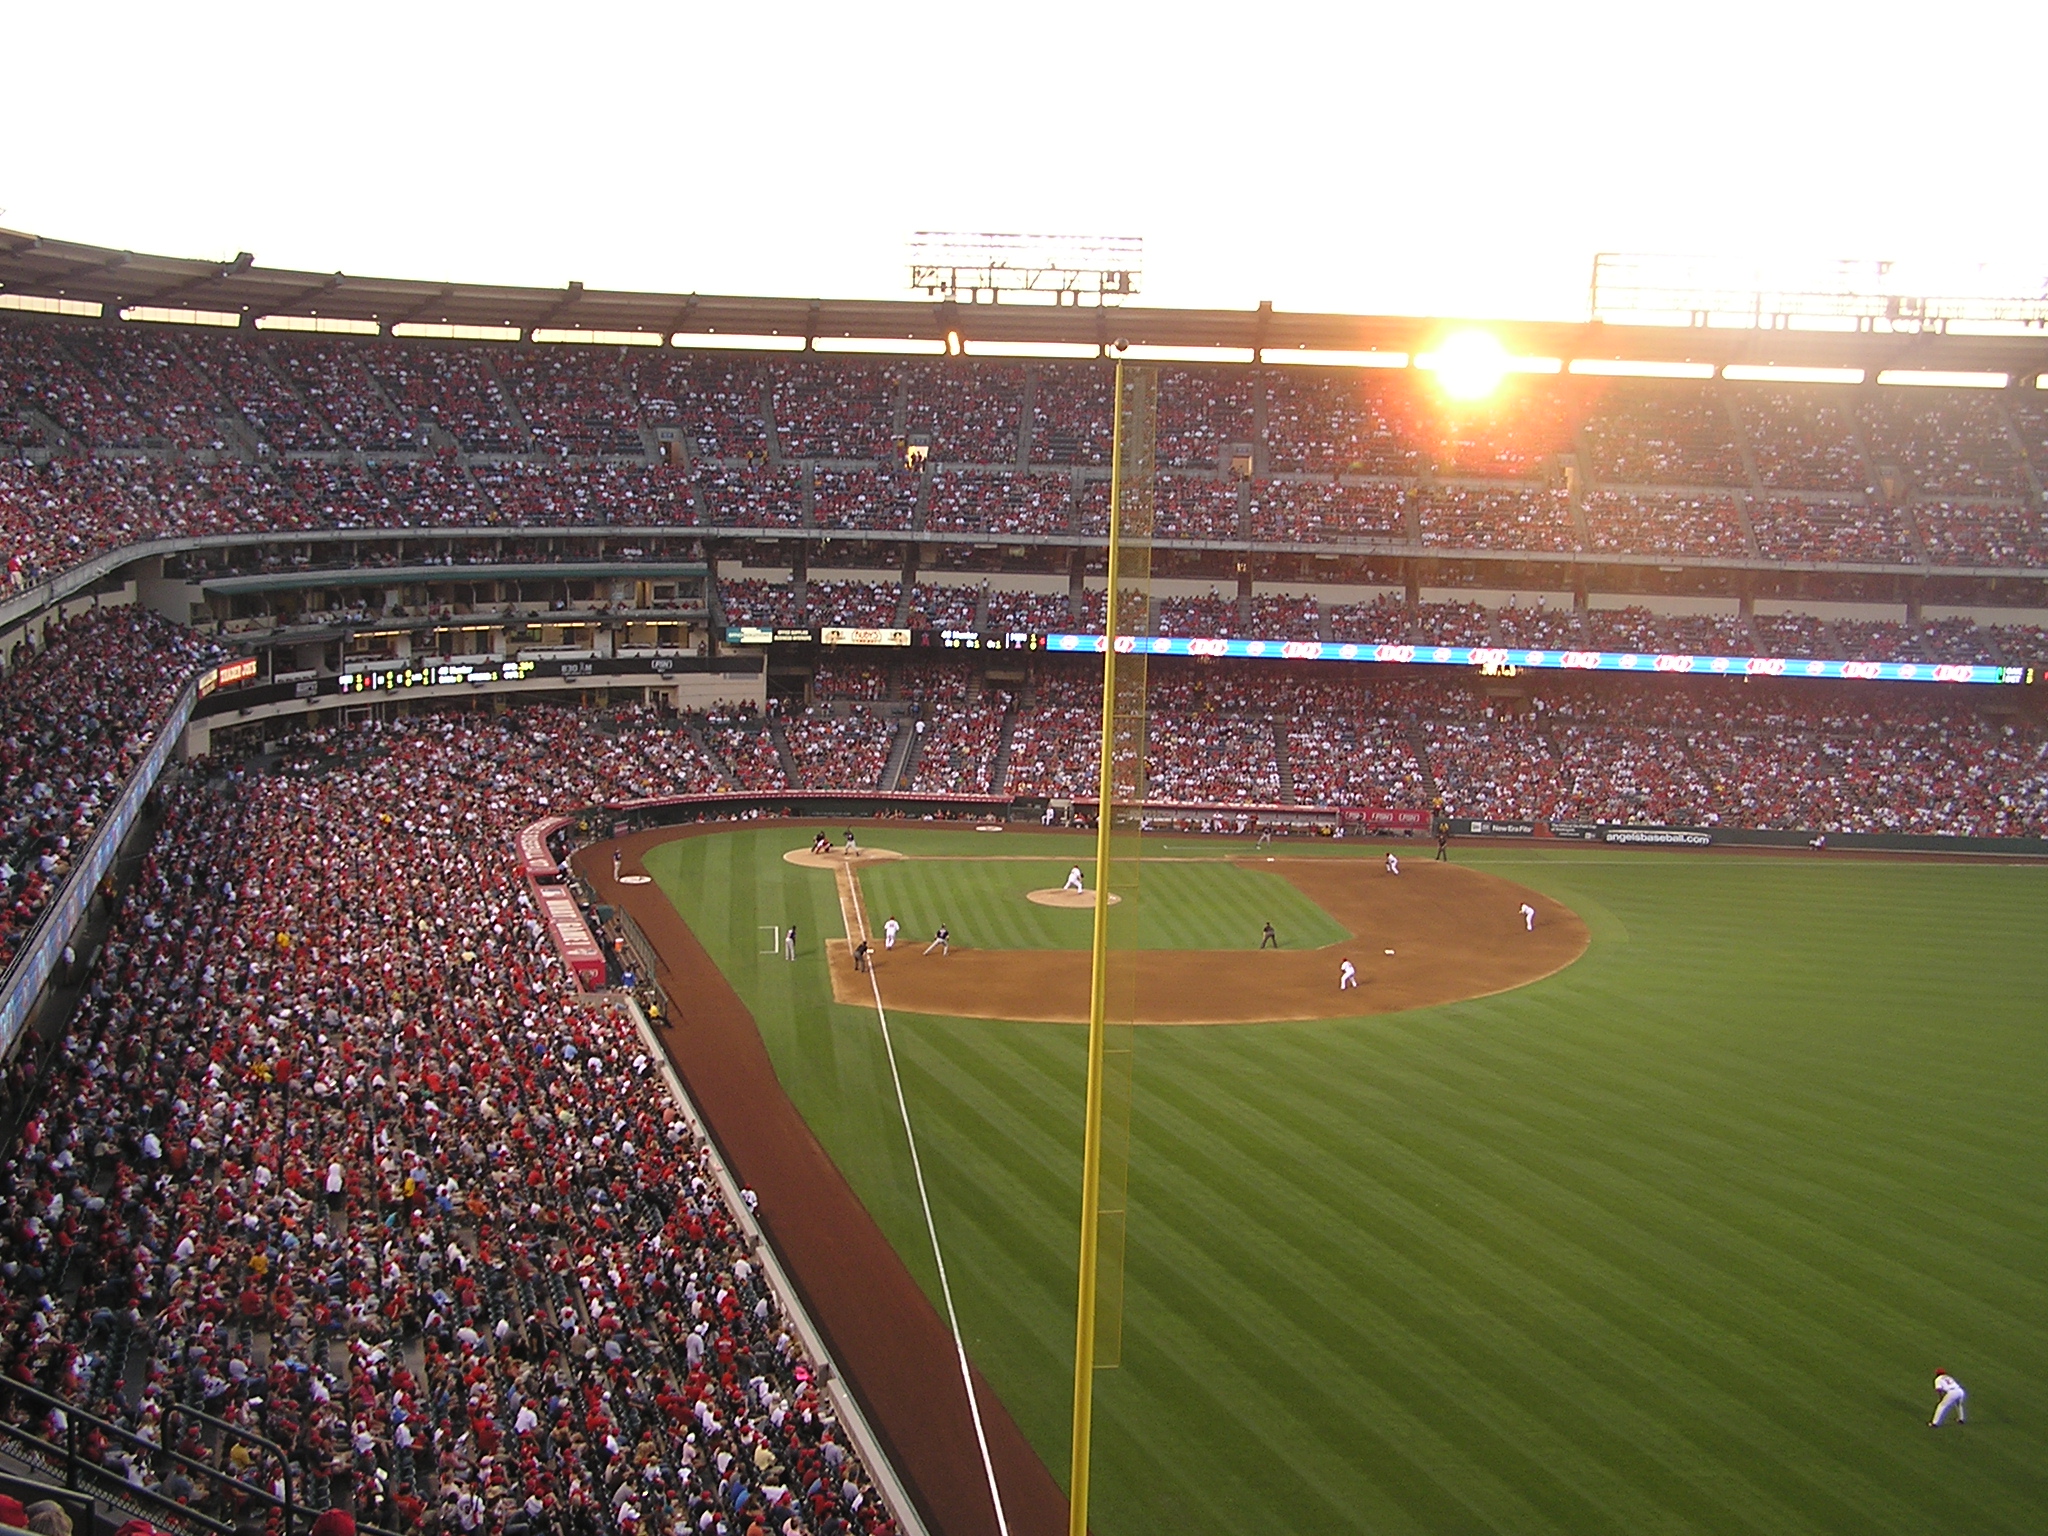 The Sun sets through the opening at Angel Stadium